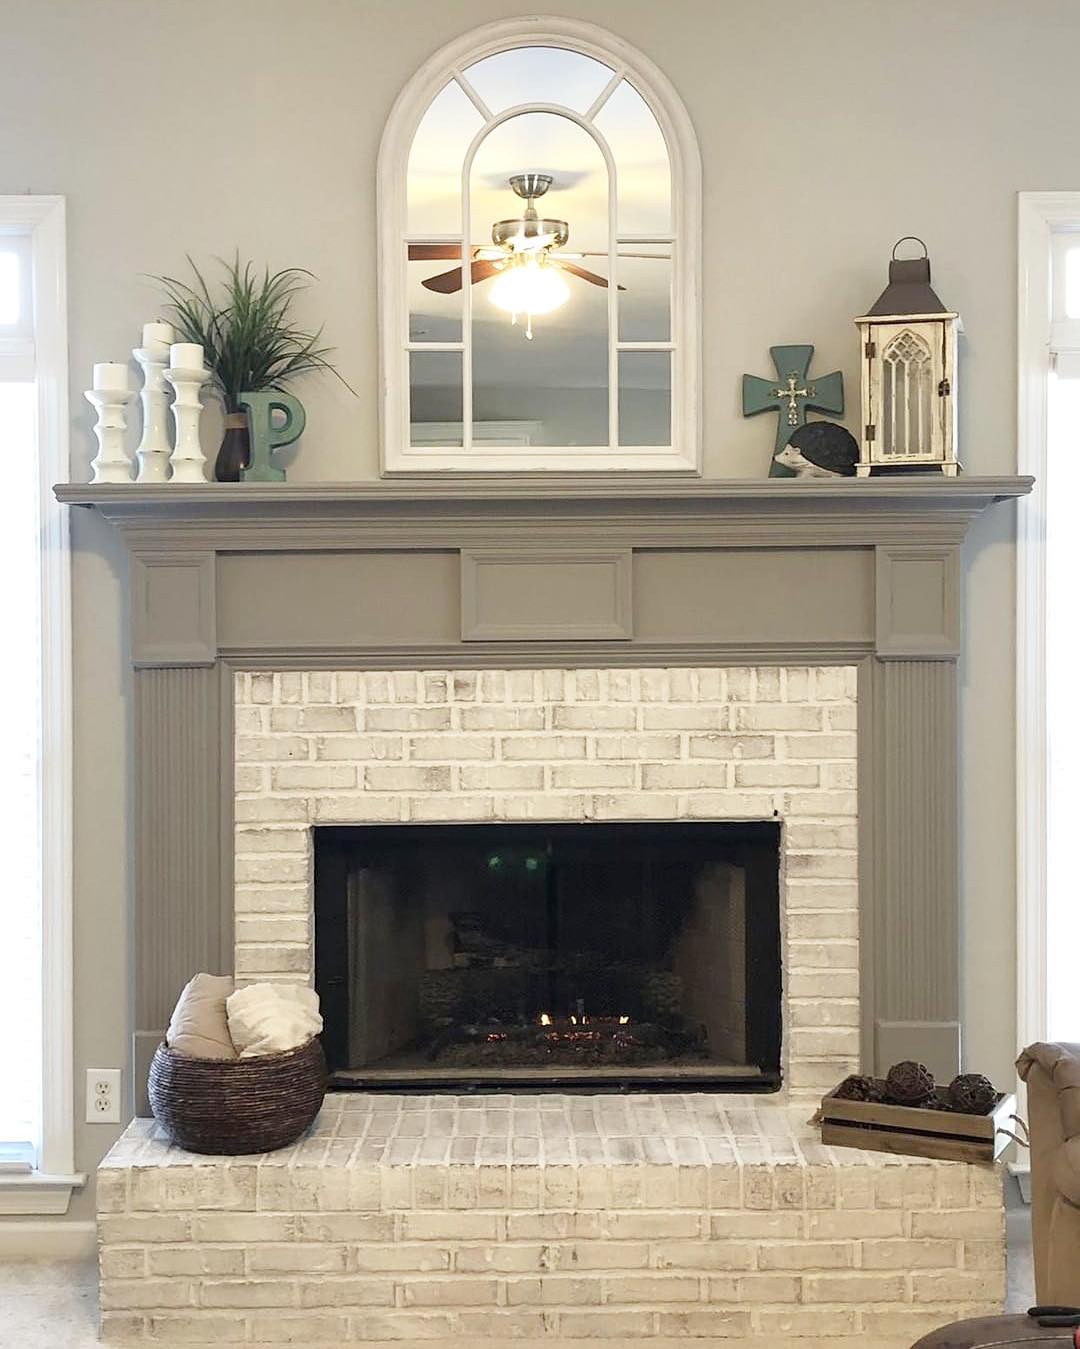 Timeless Elegance with a Limewashed Brick Fireplace